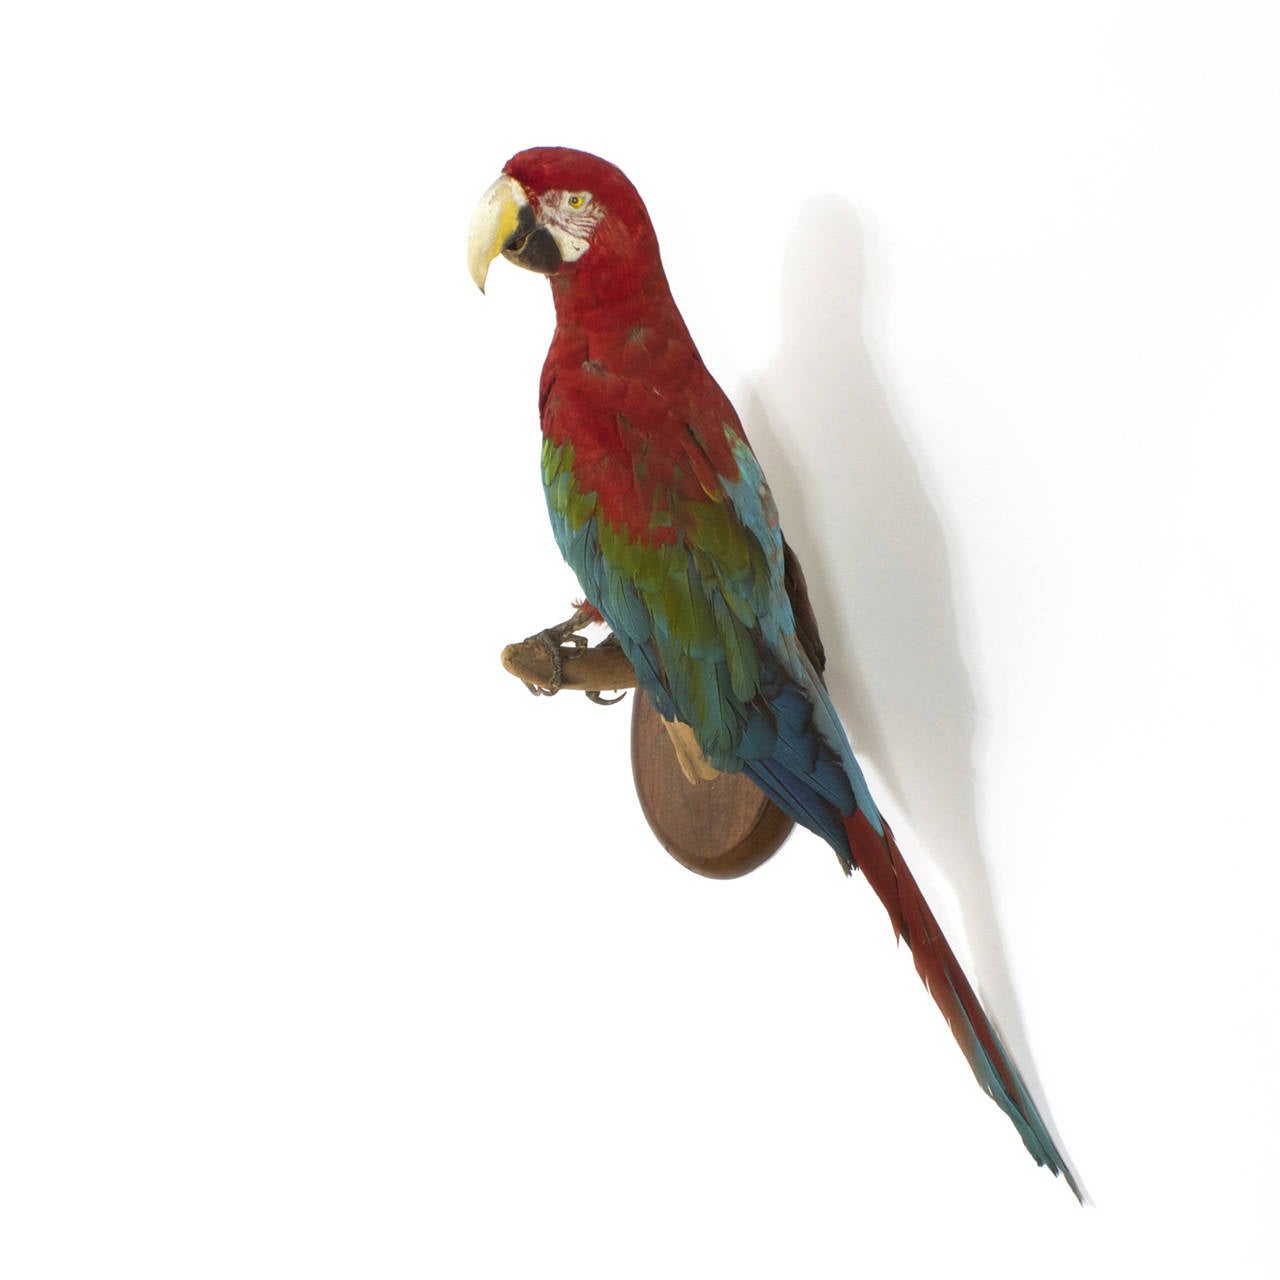 Expert example of taxidermy from the Victorian era, this parrot or Macaw is well preserved and still showing off its red, green and blue plumage in a dignified way. This tropical bird display features glass eyes and is perched on a wood branch,